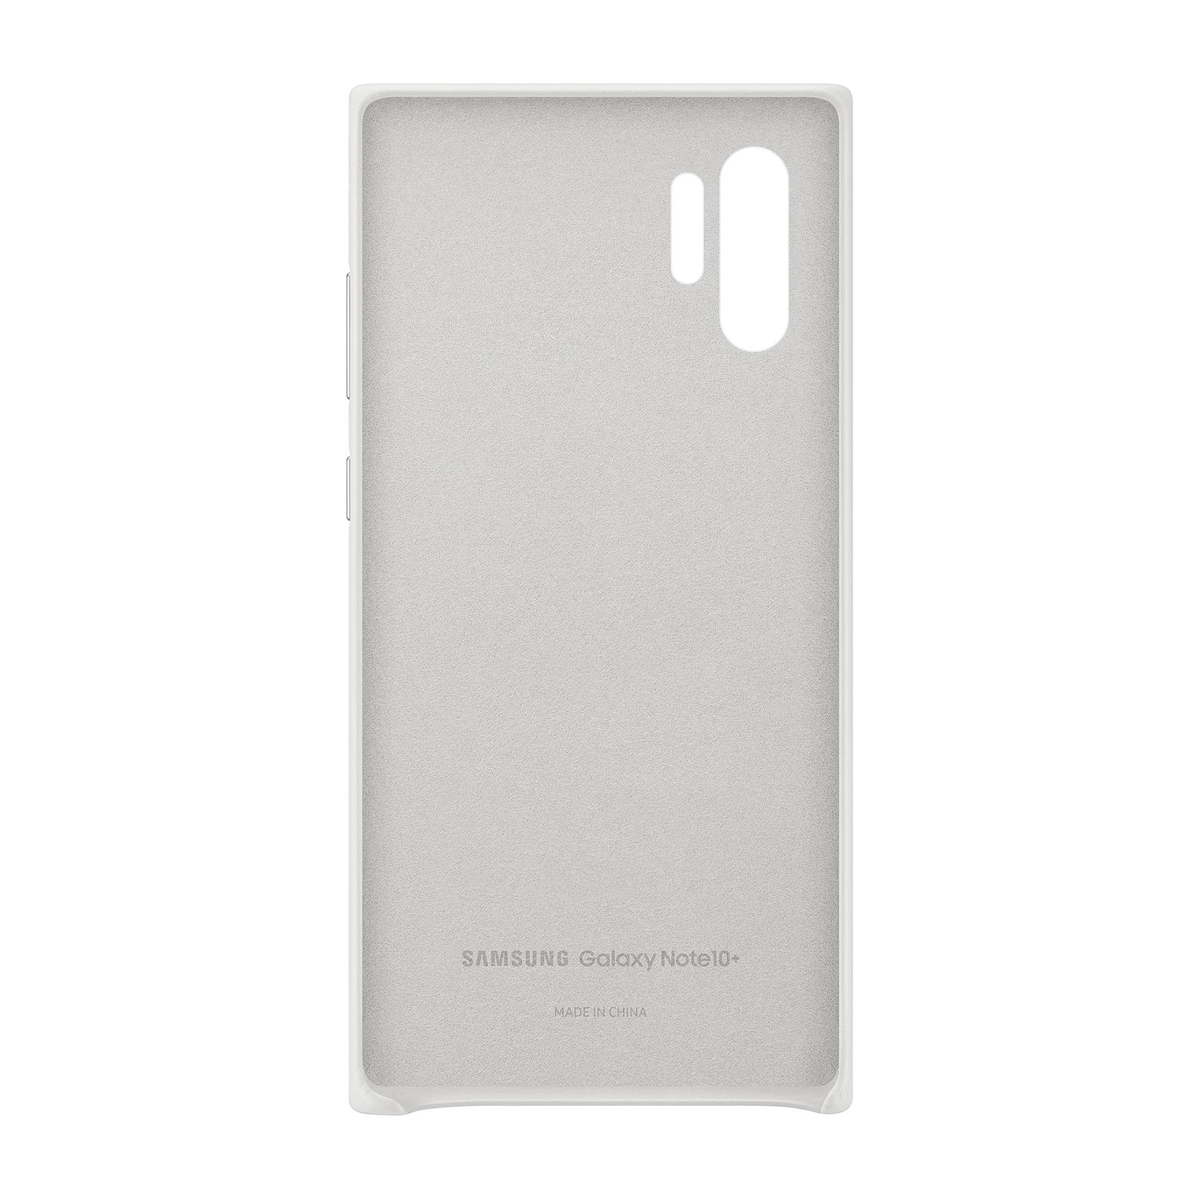 Samsung Galaxy Note10+ Leather Case VN975 White